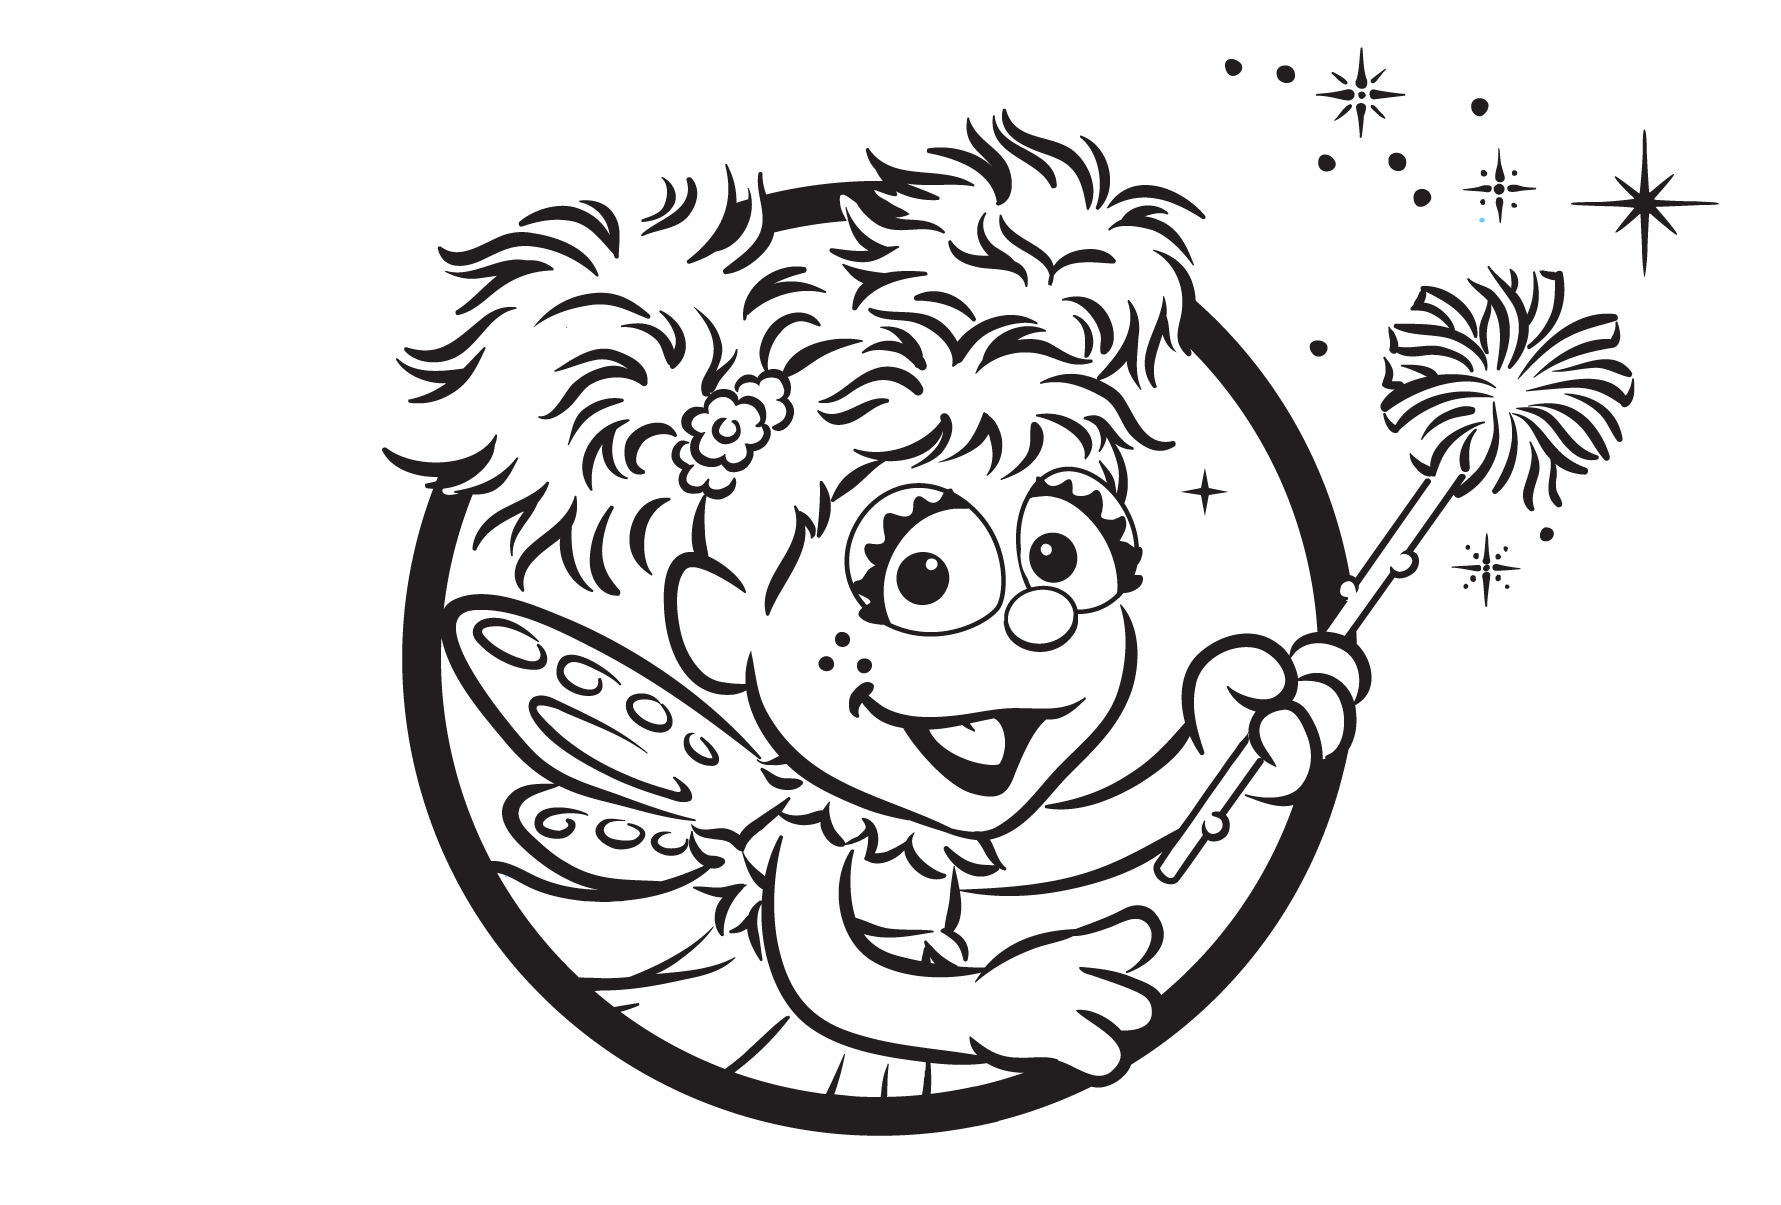 Abby Cadabby Coloring Pages Pdf to Print - Sesame Street Abby Cadabby Coloring Page